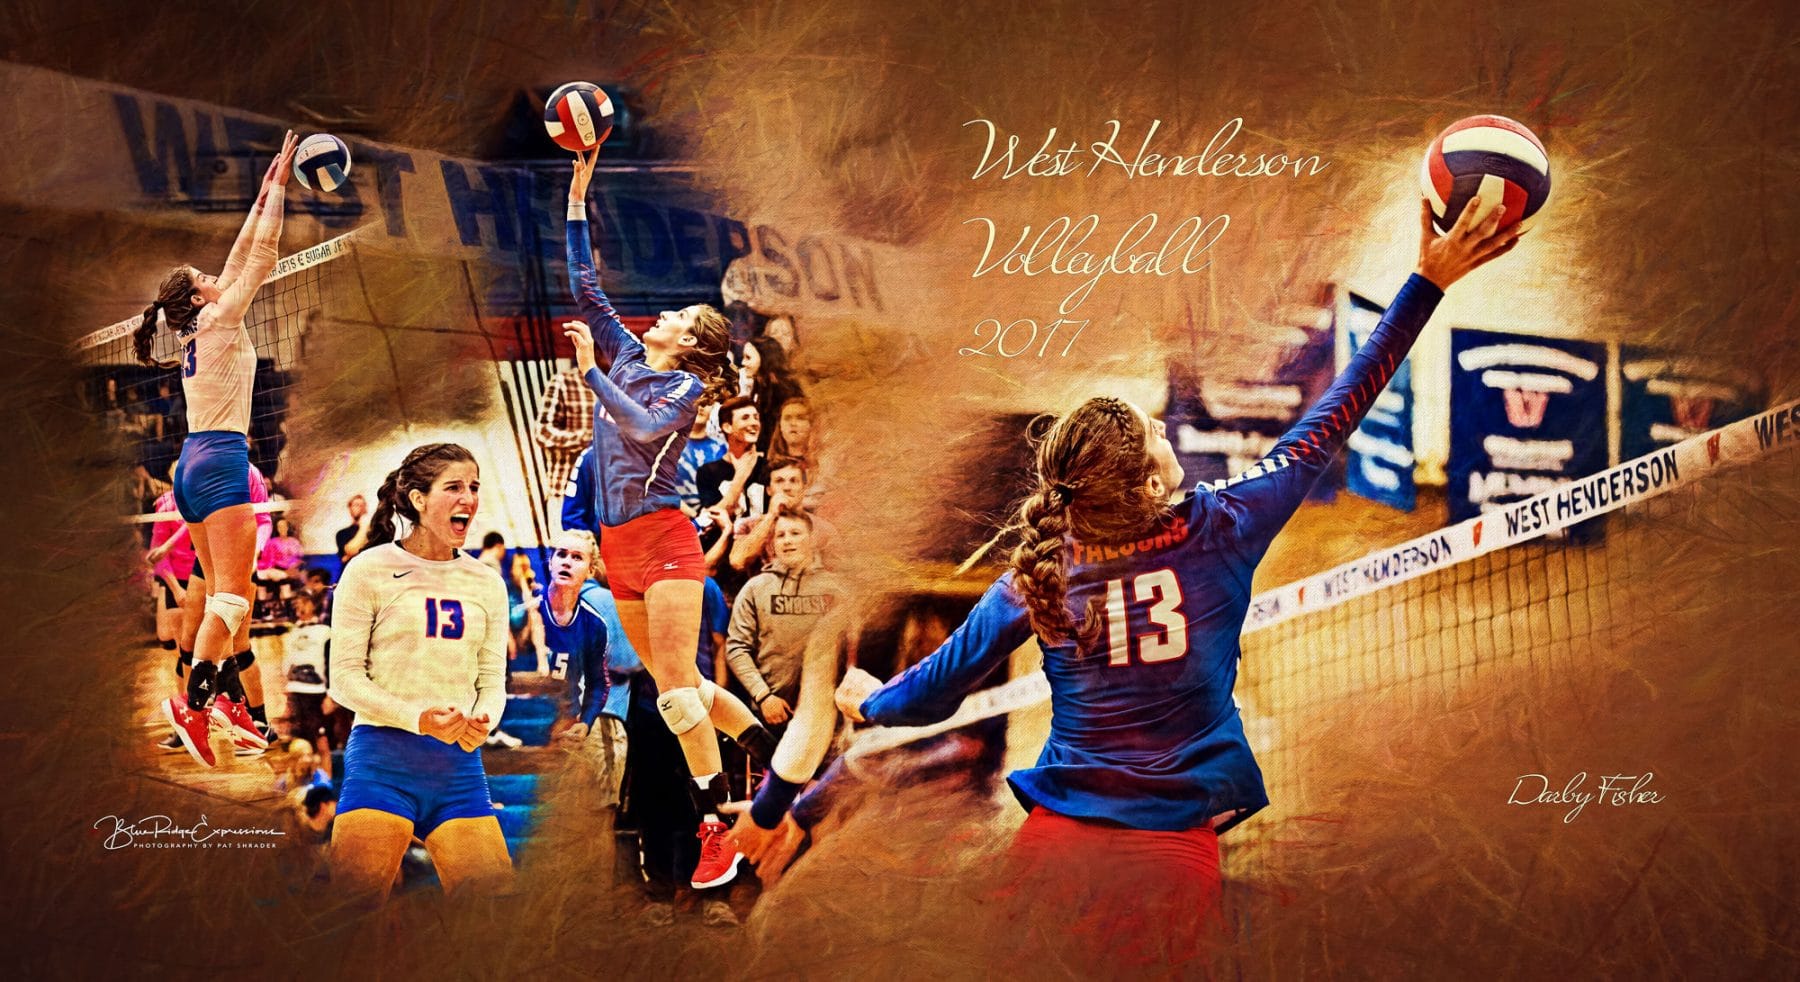 Custom cover for a volleyball memory book for Darby Fisher of West Henderson High School.